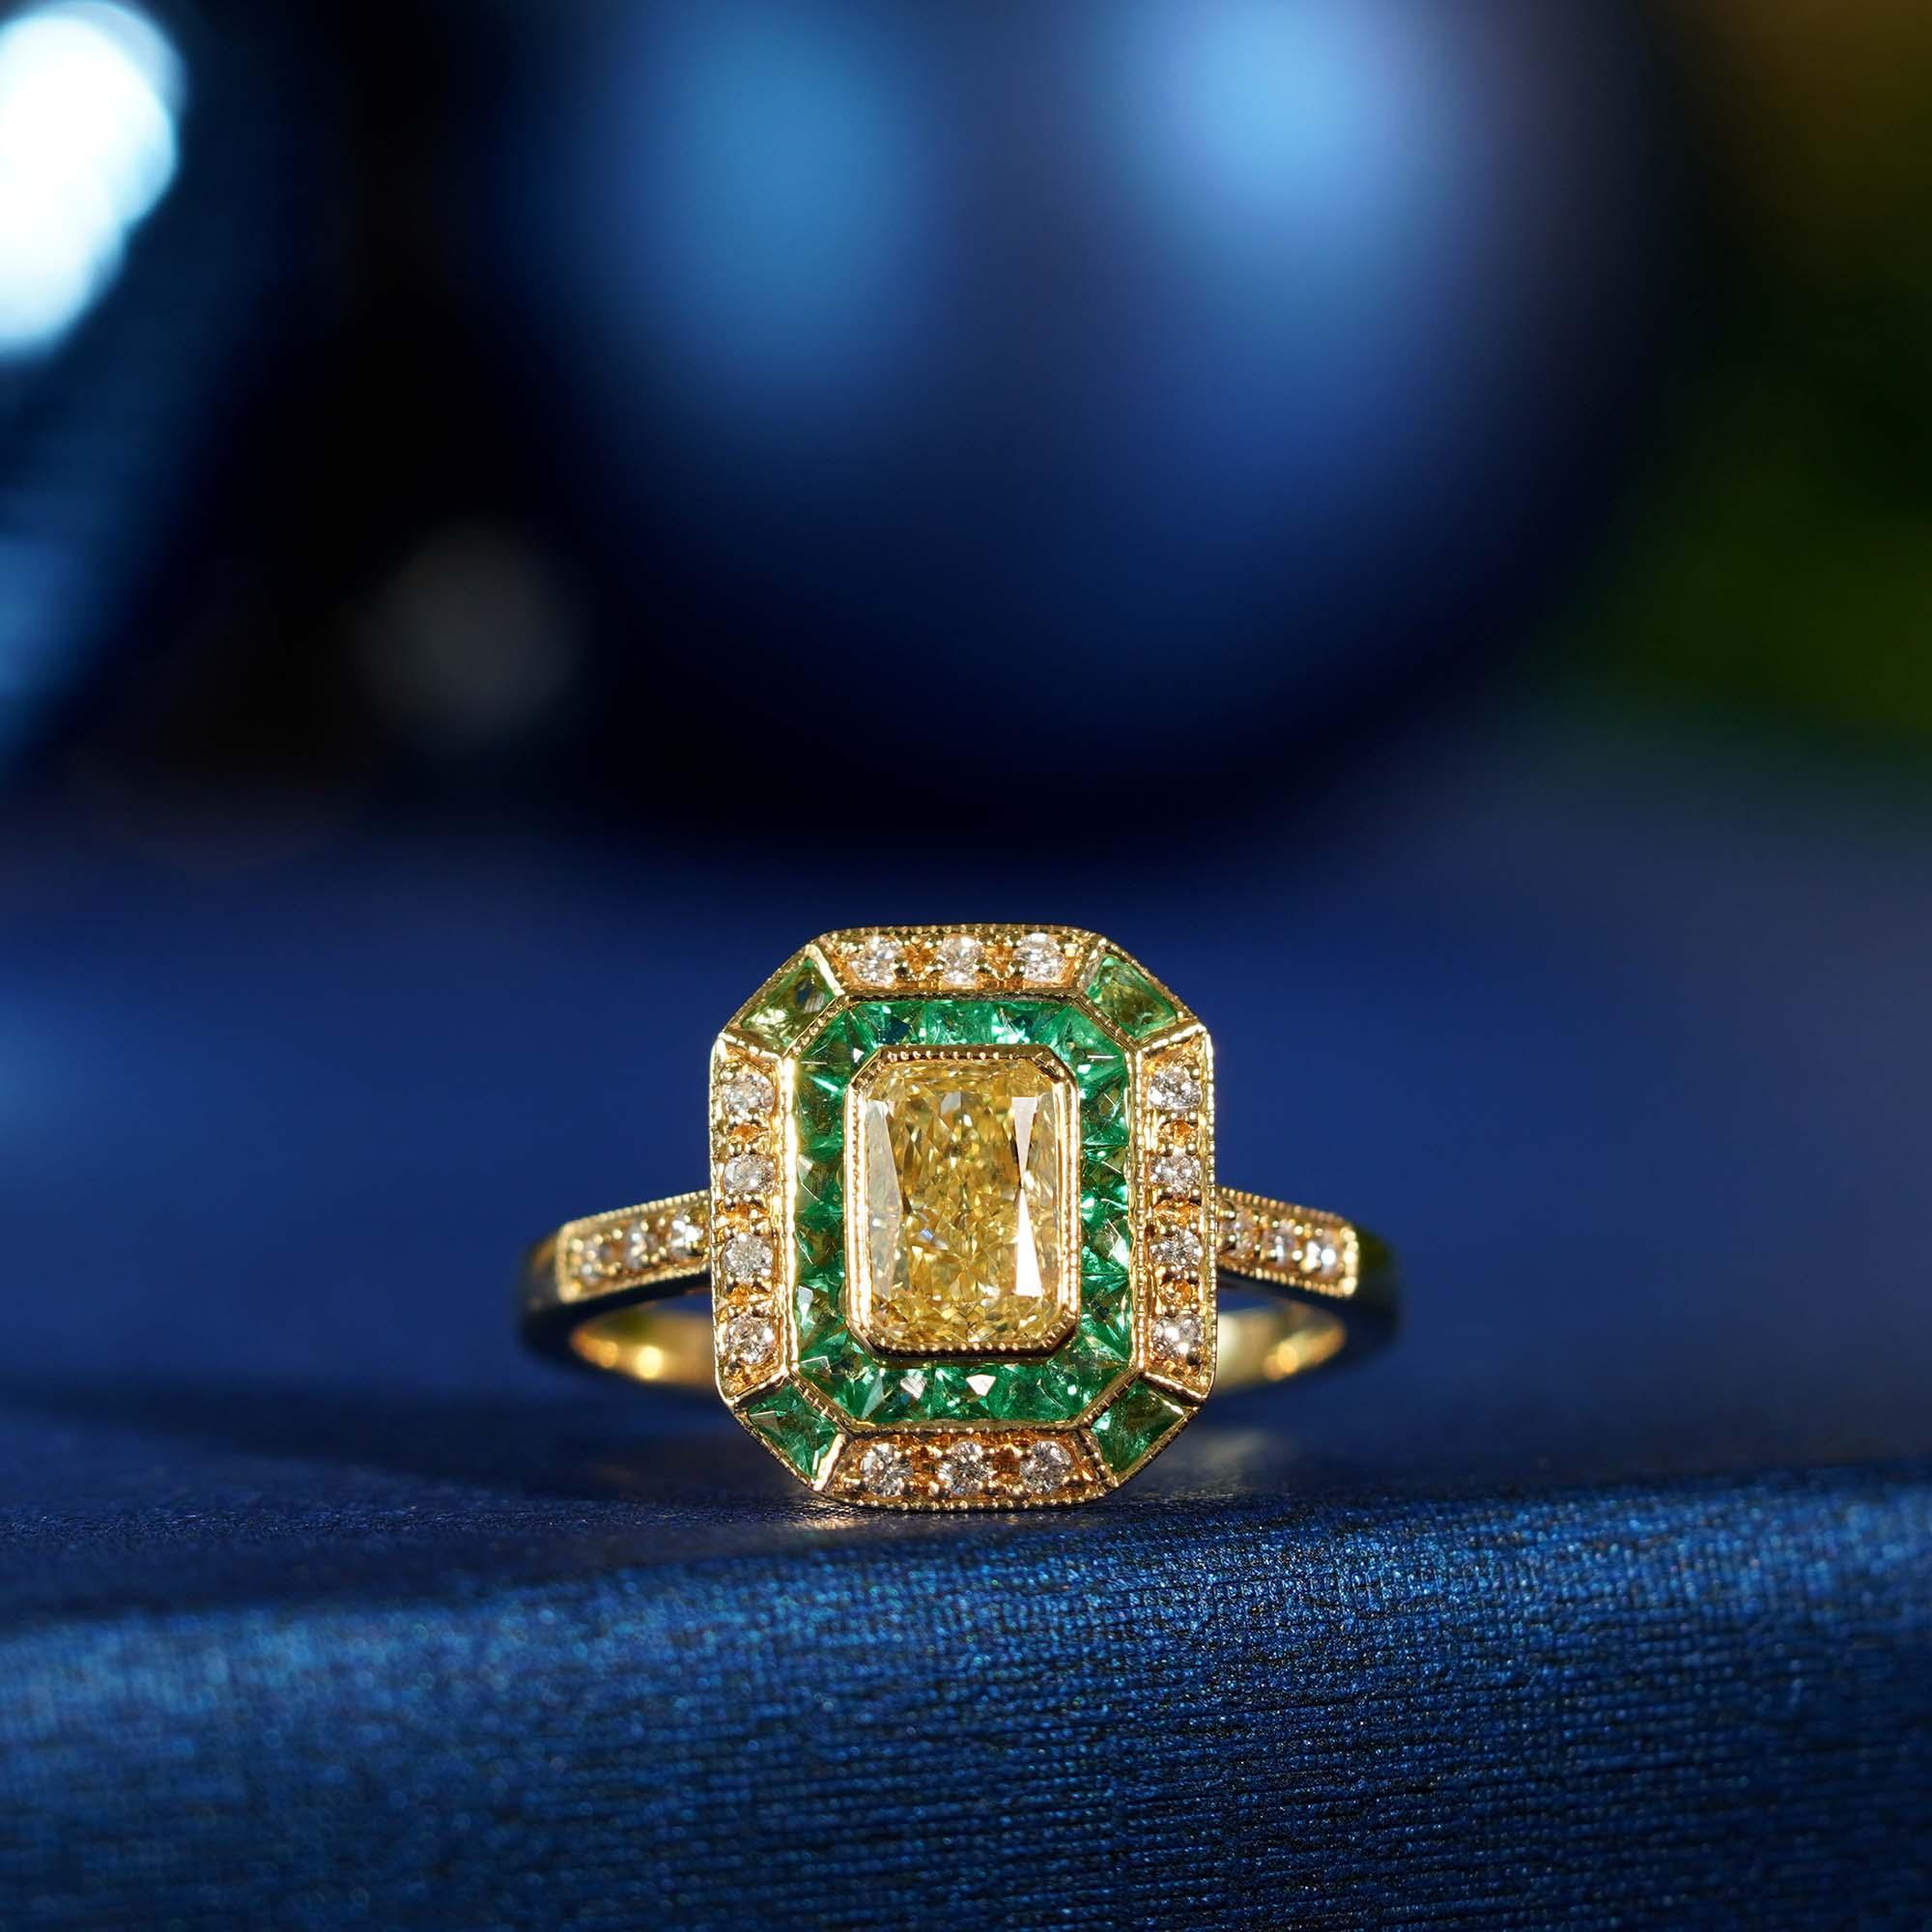 A fabulous Art Deco inspired ring stars a resplendent rich shiny fancy yellow emerald cut diamond weighing .82 carat. The glorious gemstone radiates from within an octagonal yellow gold bezel frame in bright green French cut emeralds, outlined in